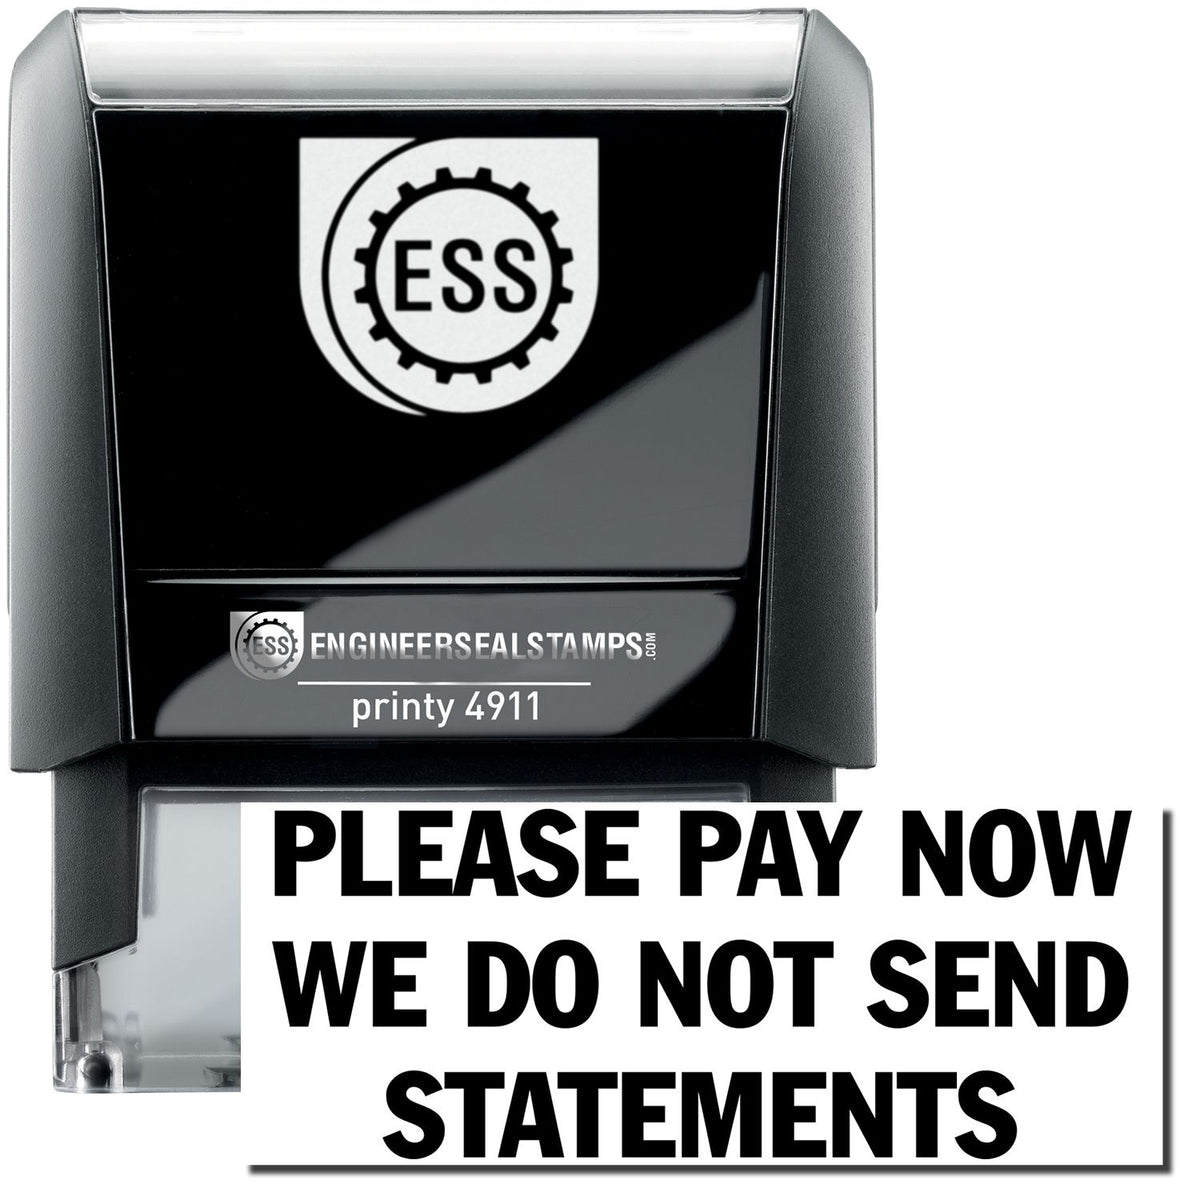 A self-inking stamp with a stamped image showing how the text &quot;PLEASE PAY NOW WE DO NOT SEND STATEMENTS&quot; is displayed after stamping.